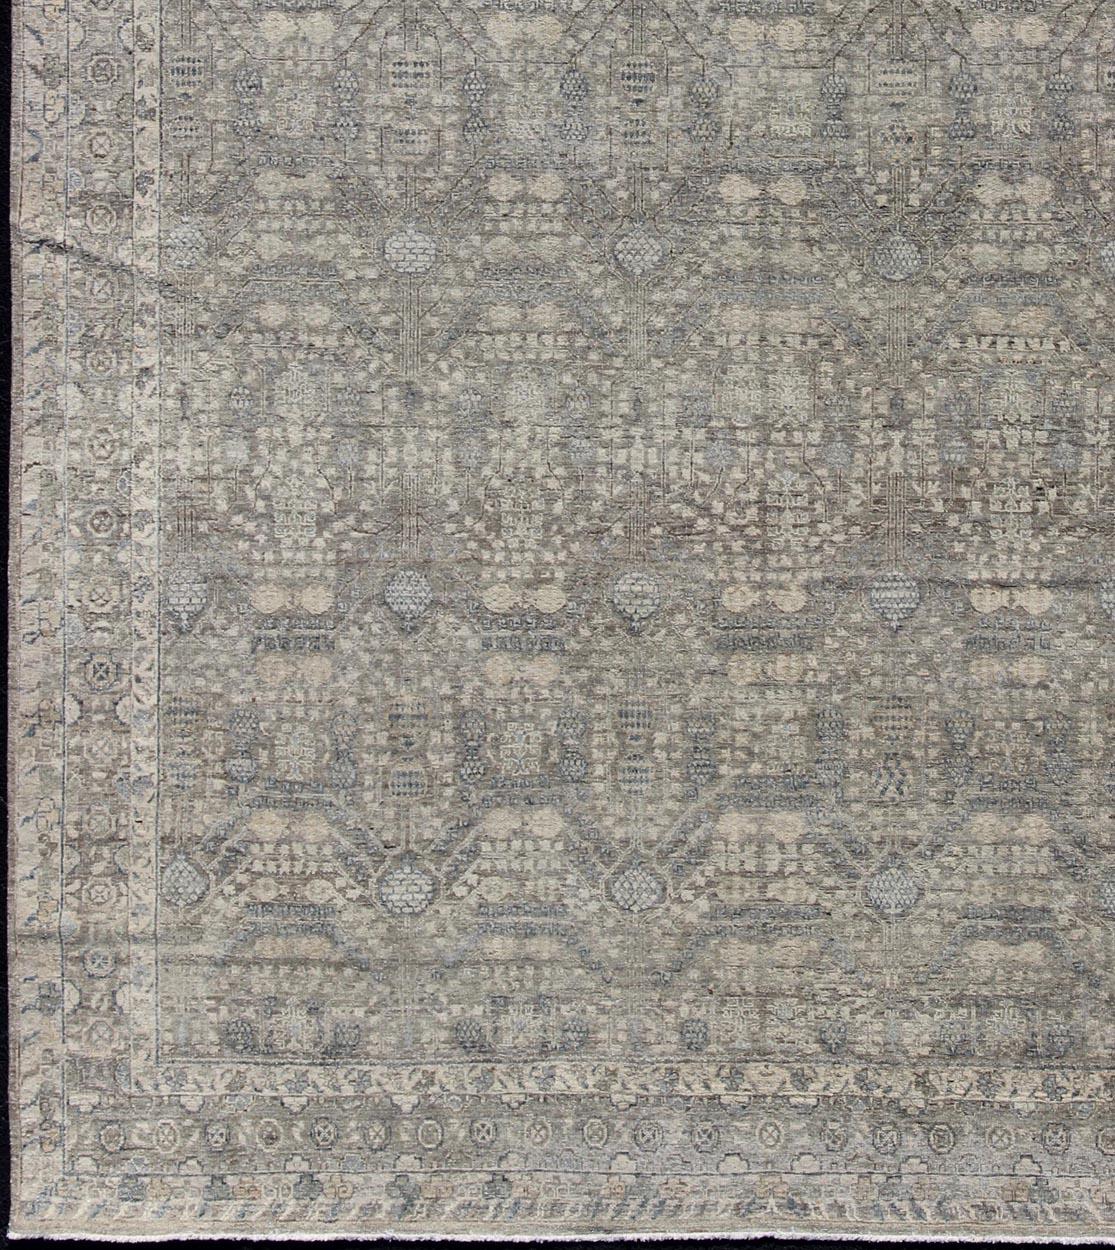 Taupe, gray, blue and neutral tones geometric Herati Tabriz design rug. Keivan Woven Arts / rug PMZ-85034856, country of origin / India type: Tabriz.
Measures: 9'11 x 13'9.
This Tabriz carpet features a field filled with an all-over design